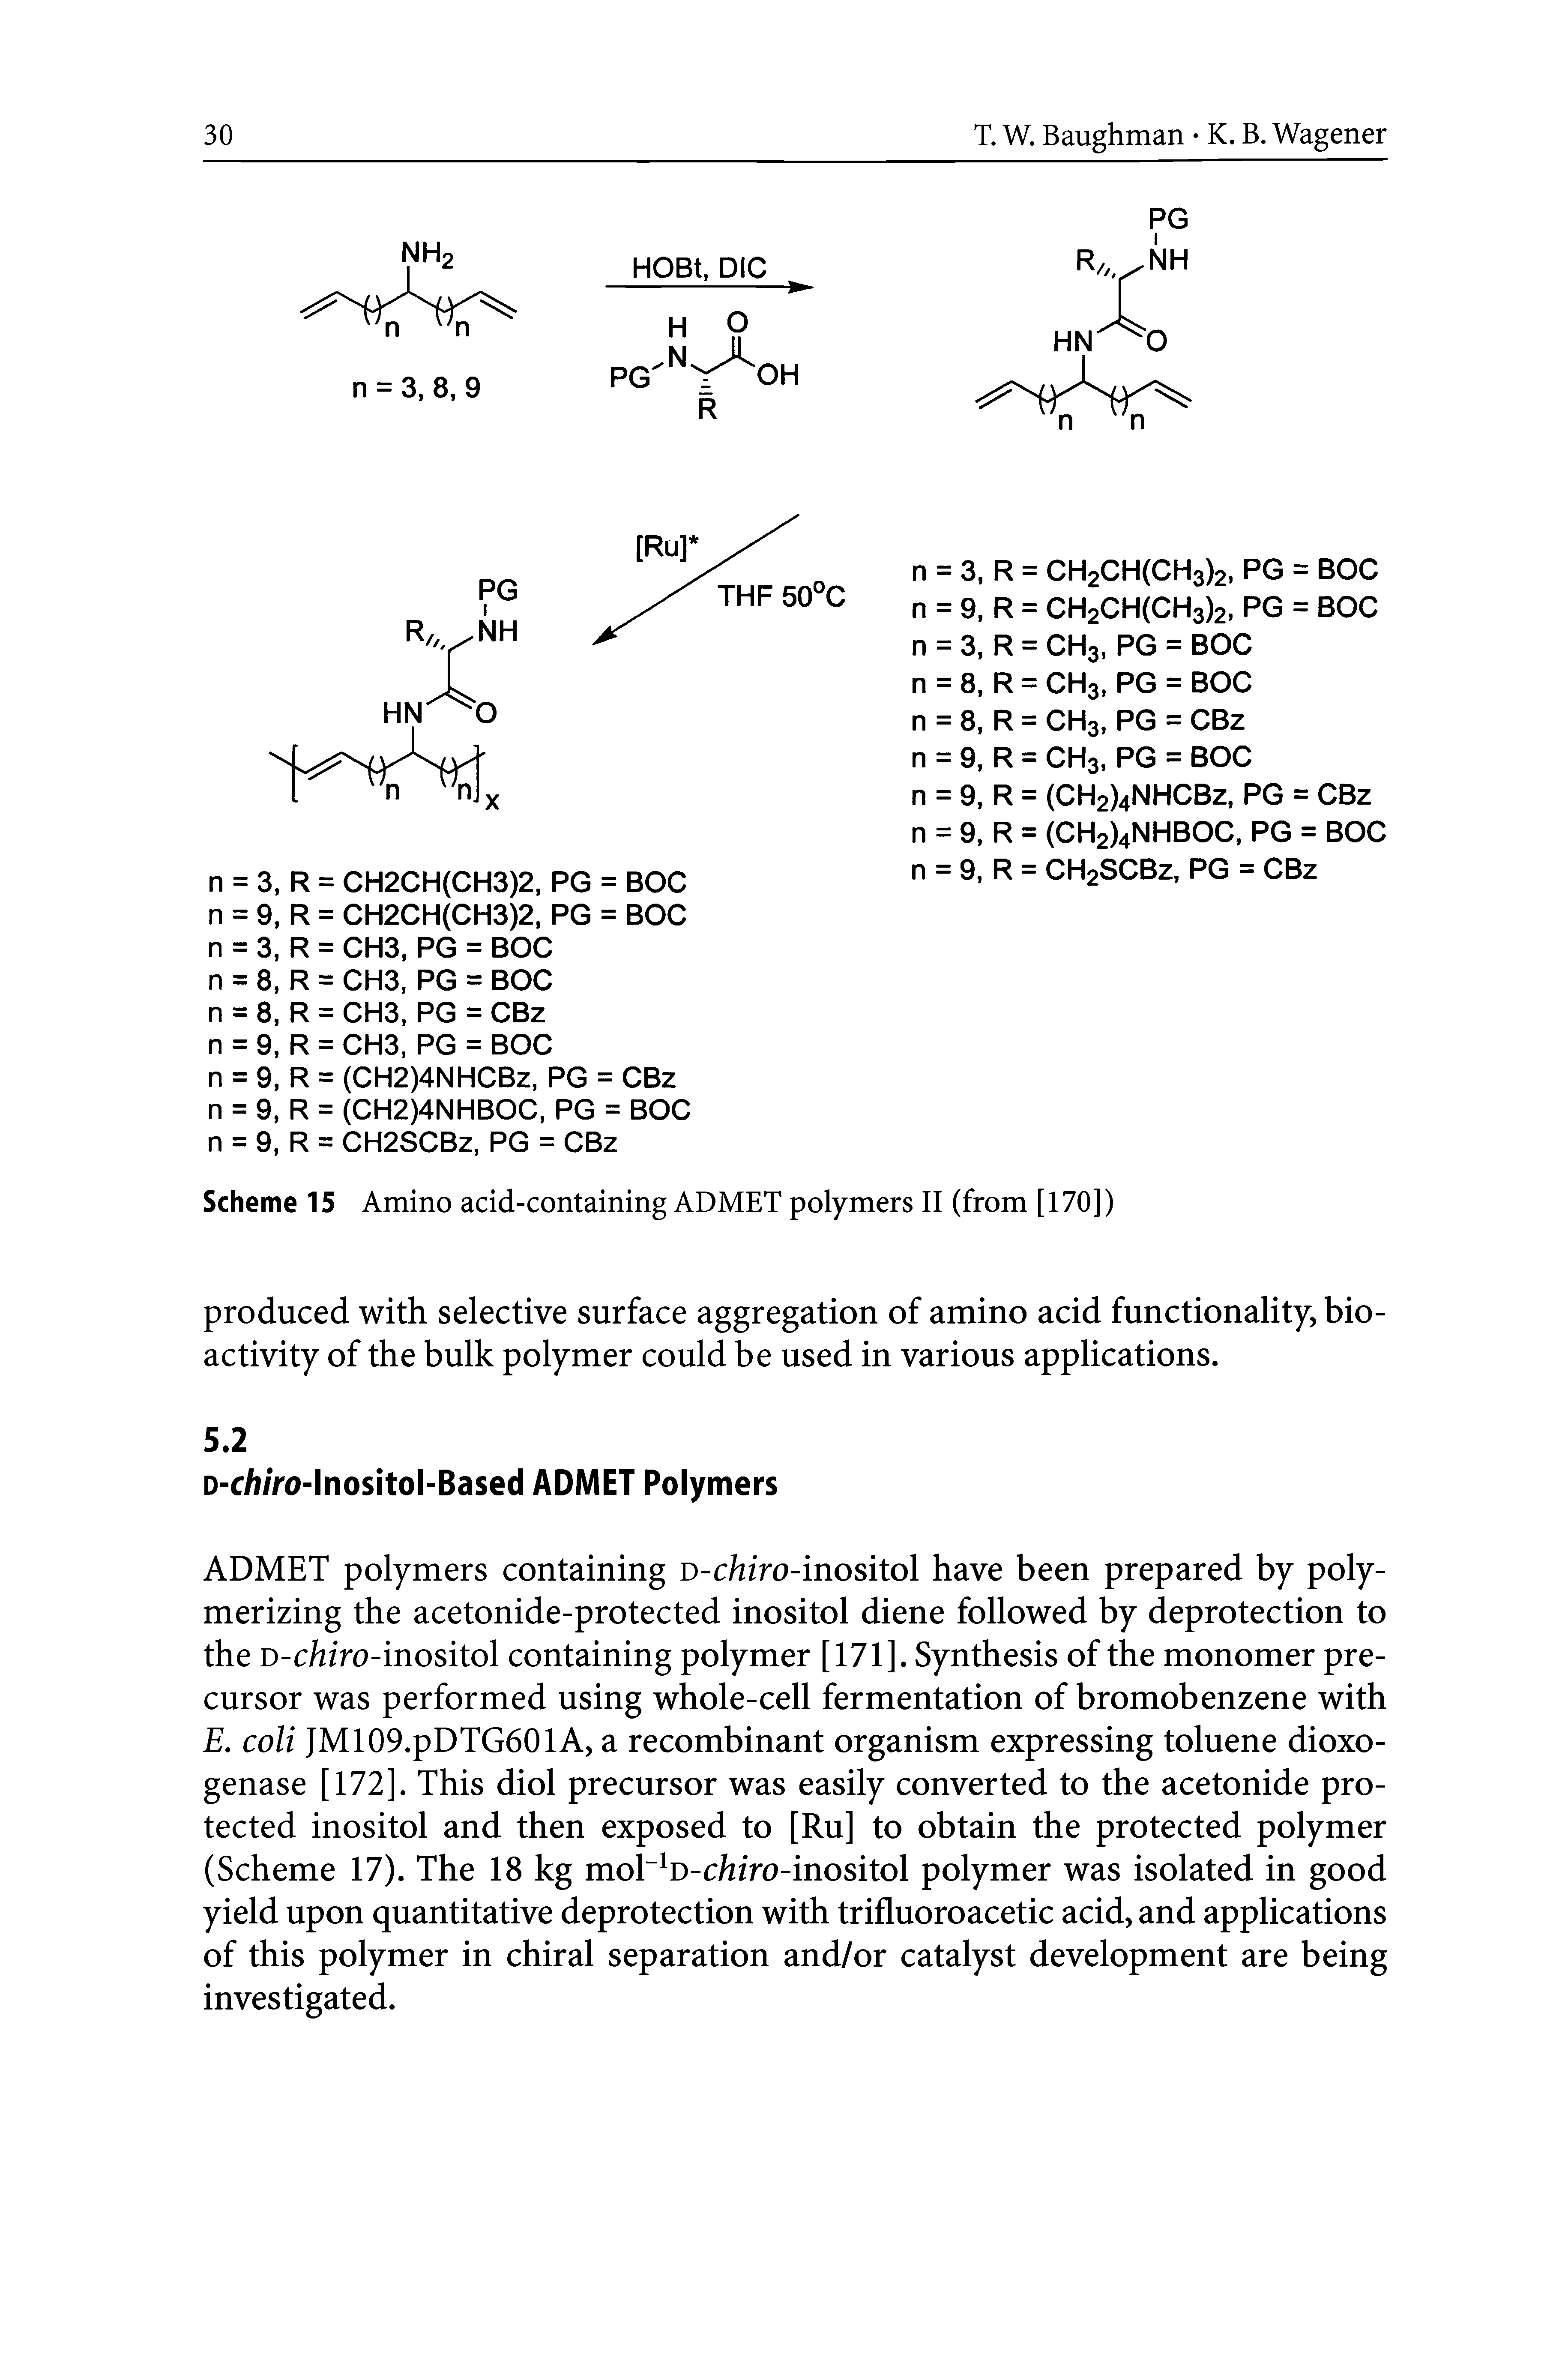 Scheme 15 Amino acid-containing ADMET polymers II (from [170])...